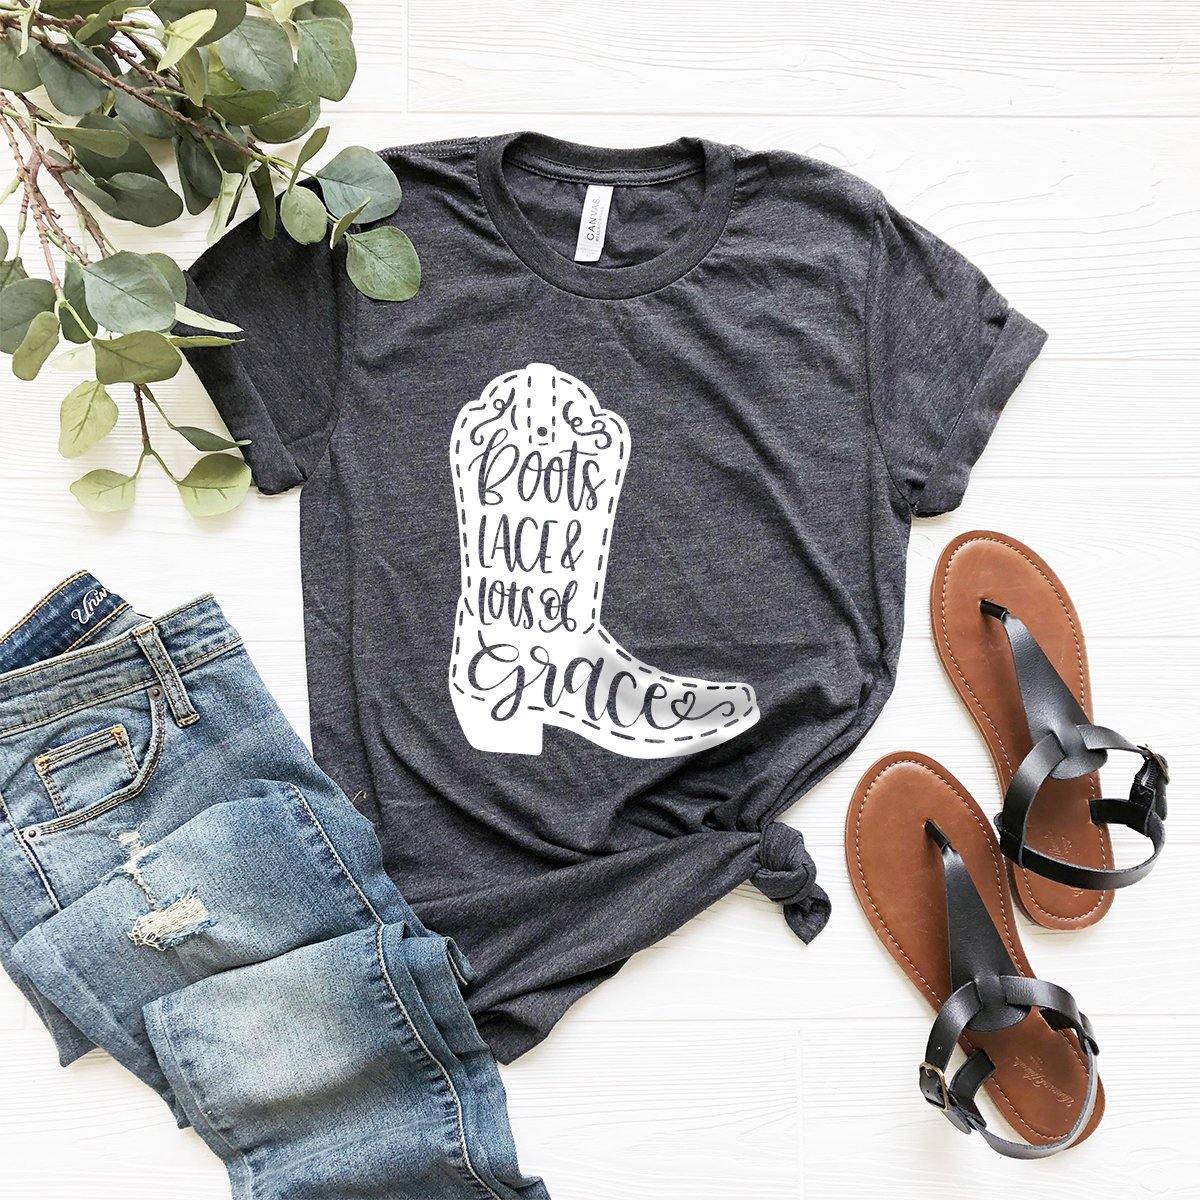 Western Girl Shirt, Country Girl Shirt, Southern Girl Shirt, Boots Lace And Lots Of Grace Shirt, Cowgirl Boots Shirt, Southern Shirt - Fastdeliverytees.com